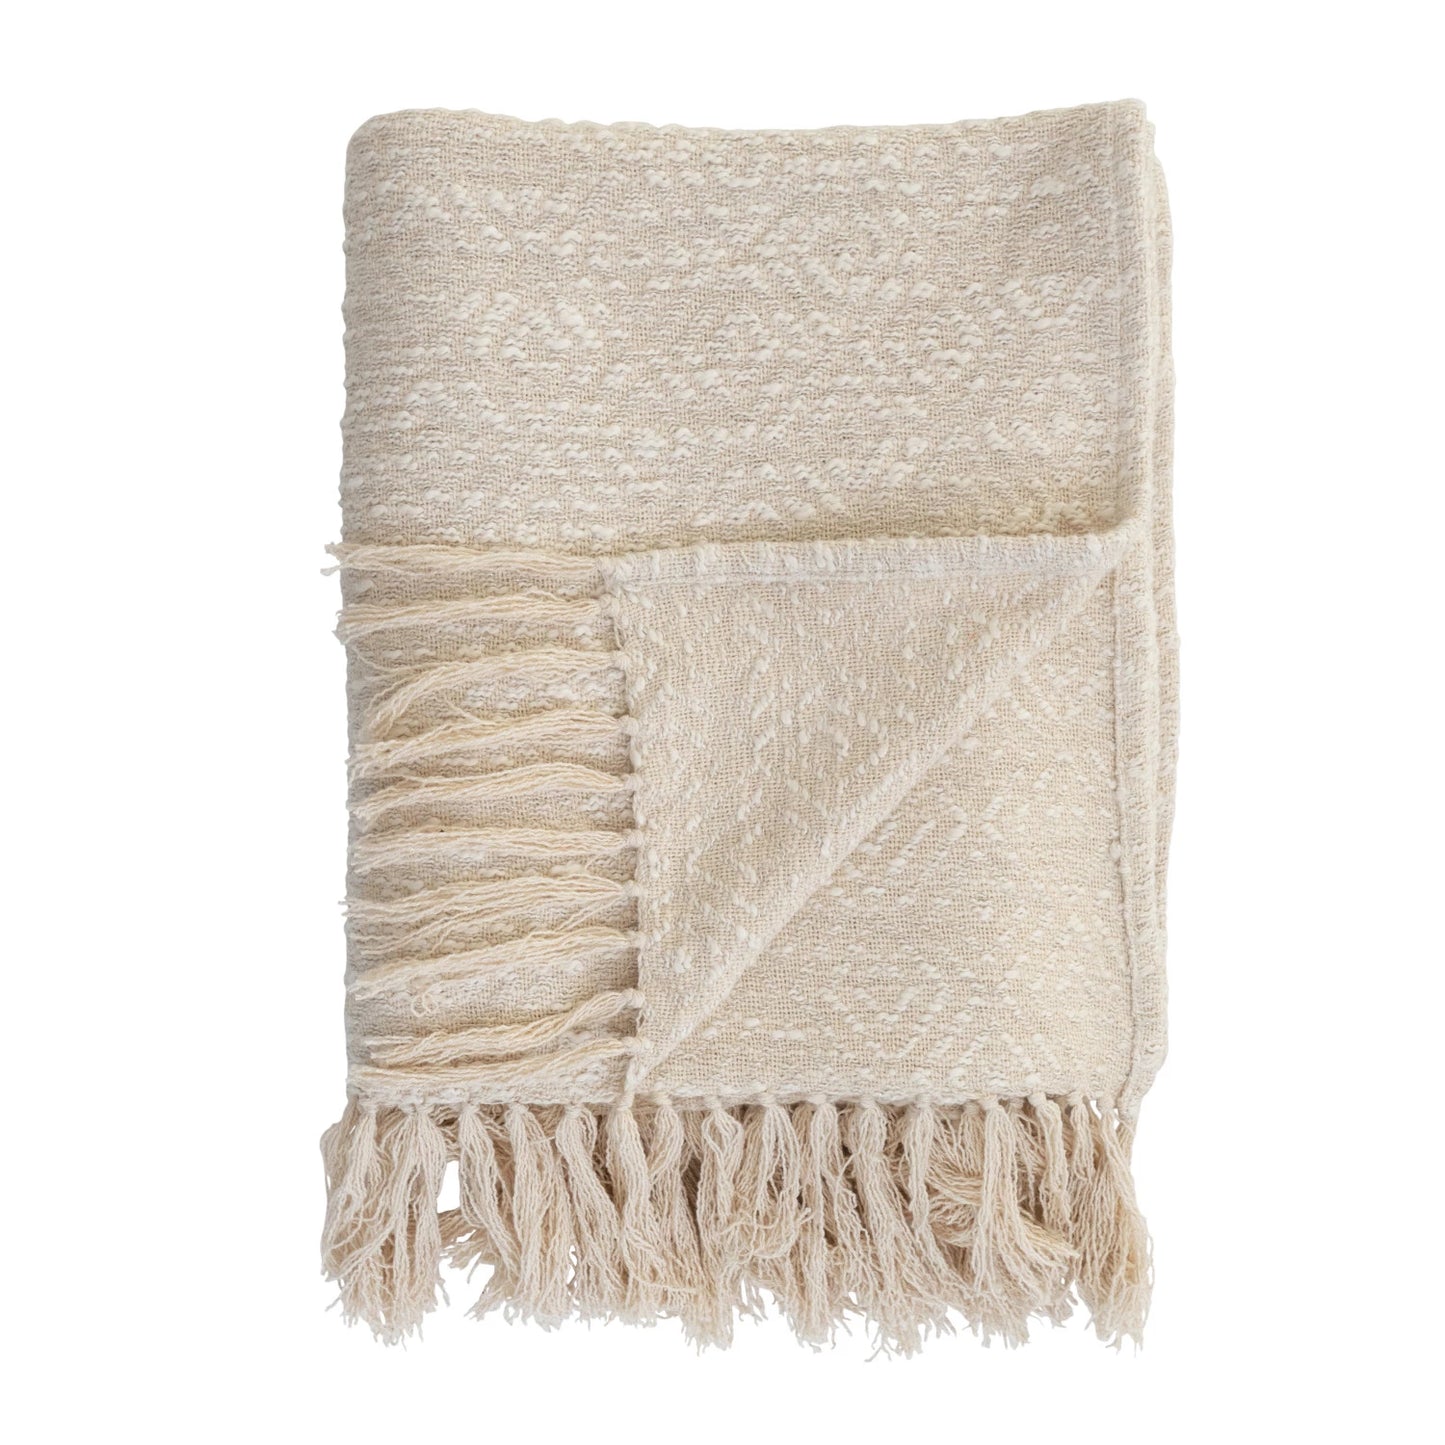 Shelf knotted Fringe Woven Printed Throw Blanket